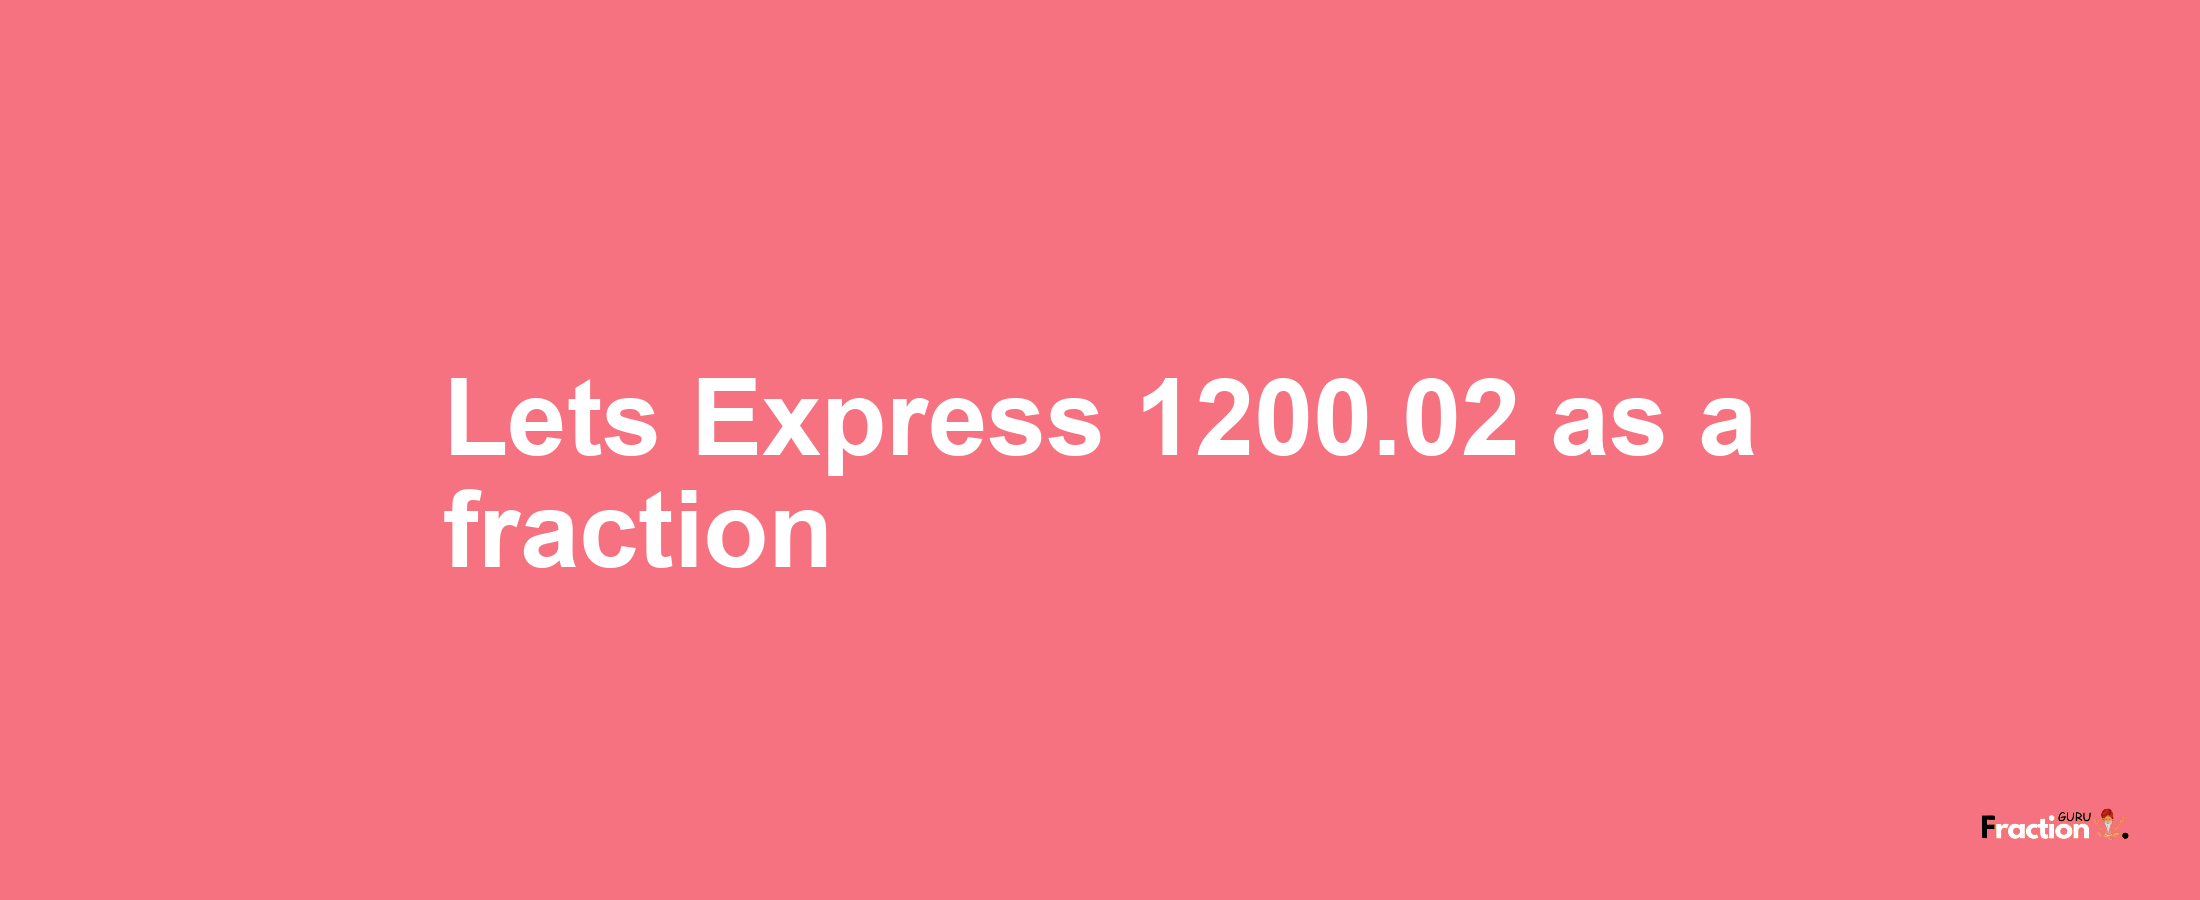 Lets Express 1200.02 as afraction